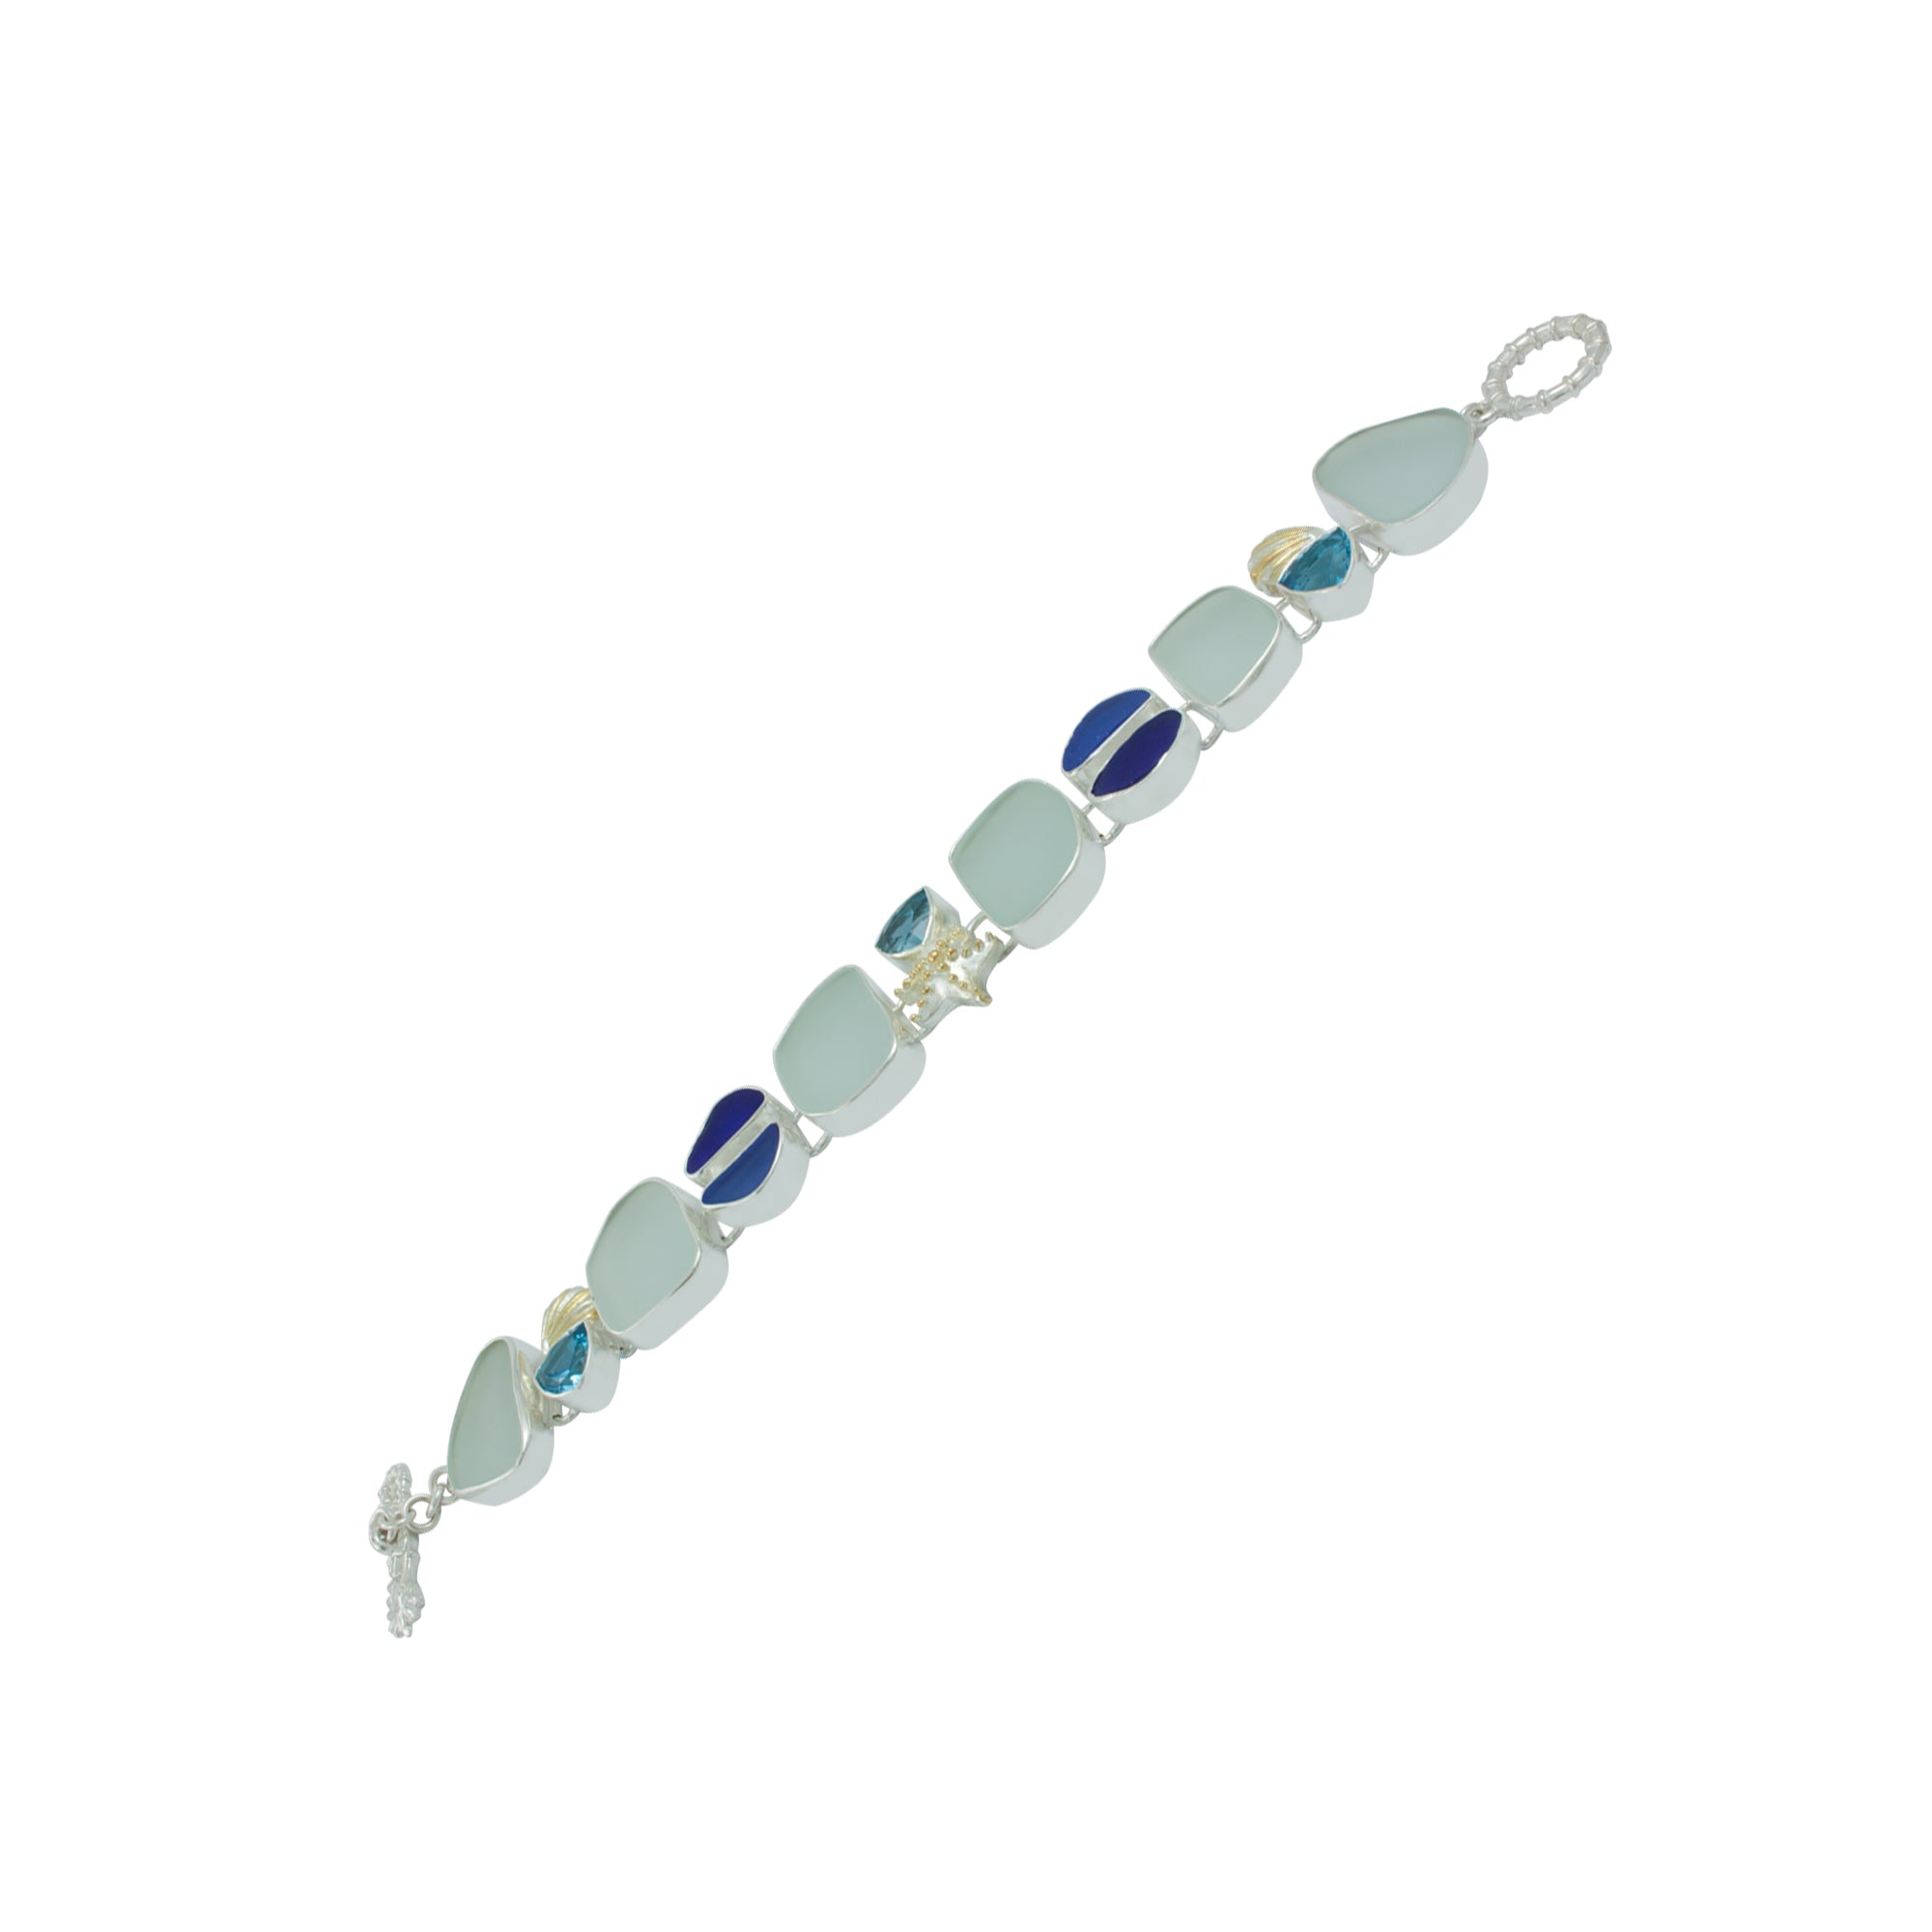 Exquisite Sea Glass bracelet with Sea life and gem stones..a must have !